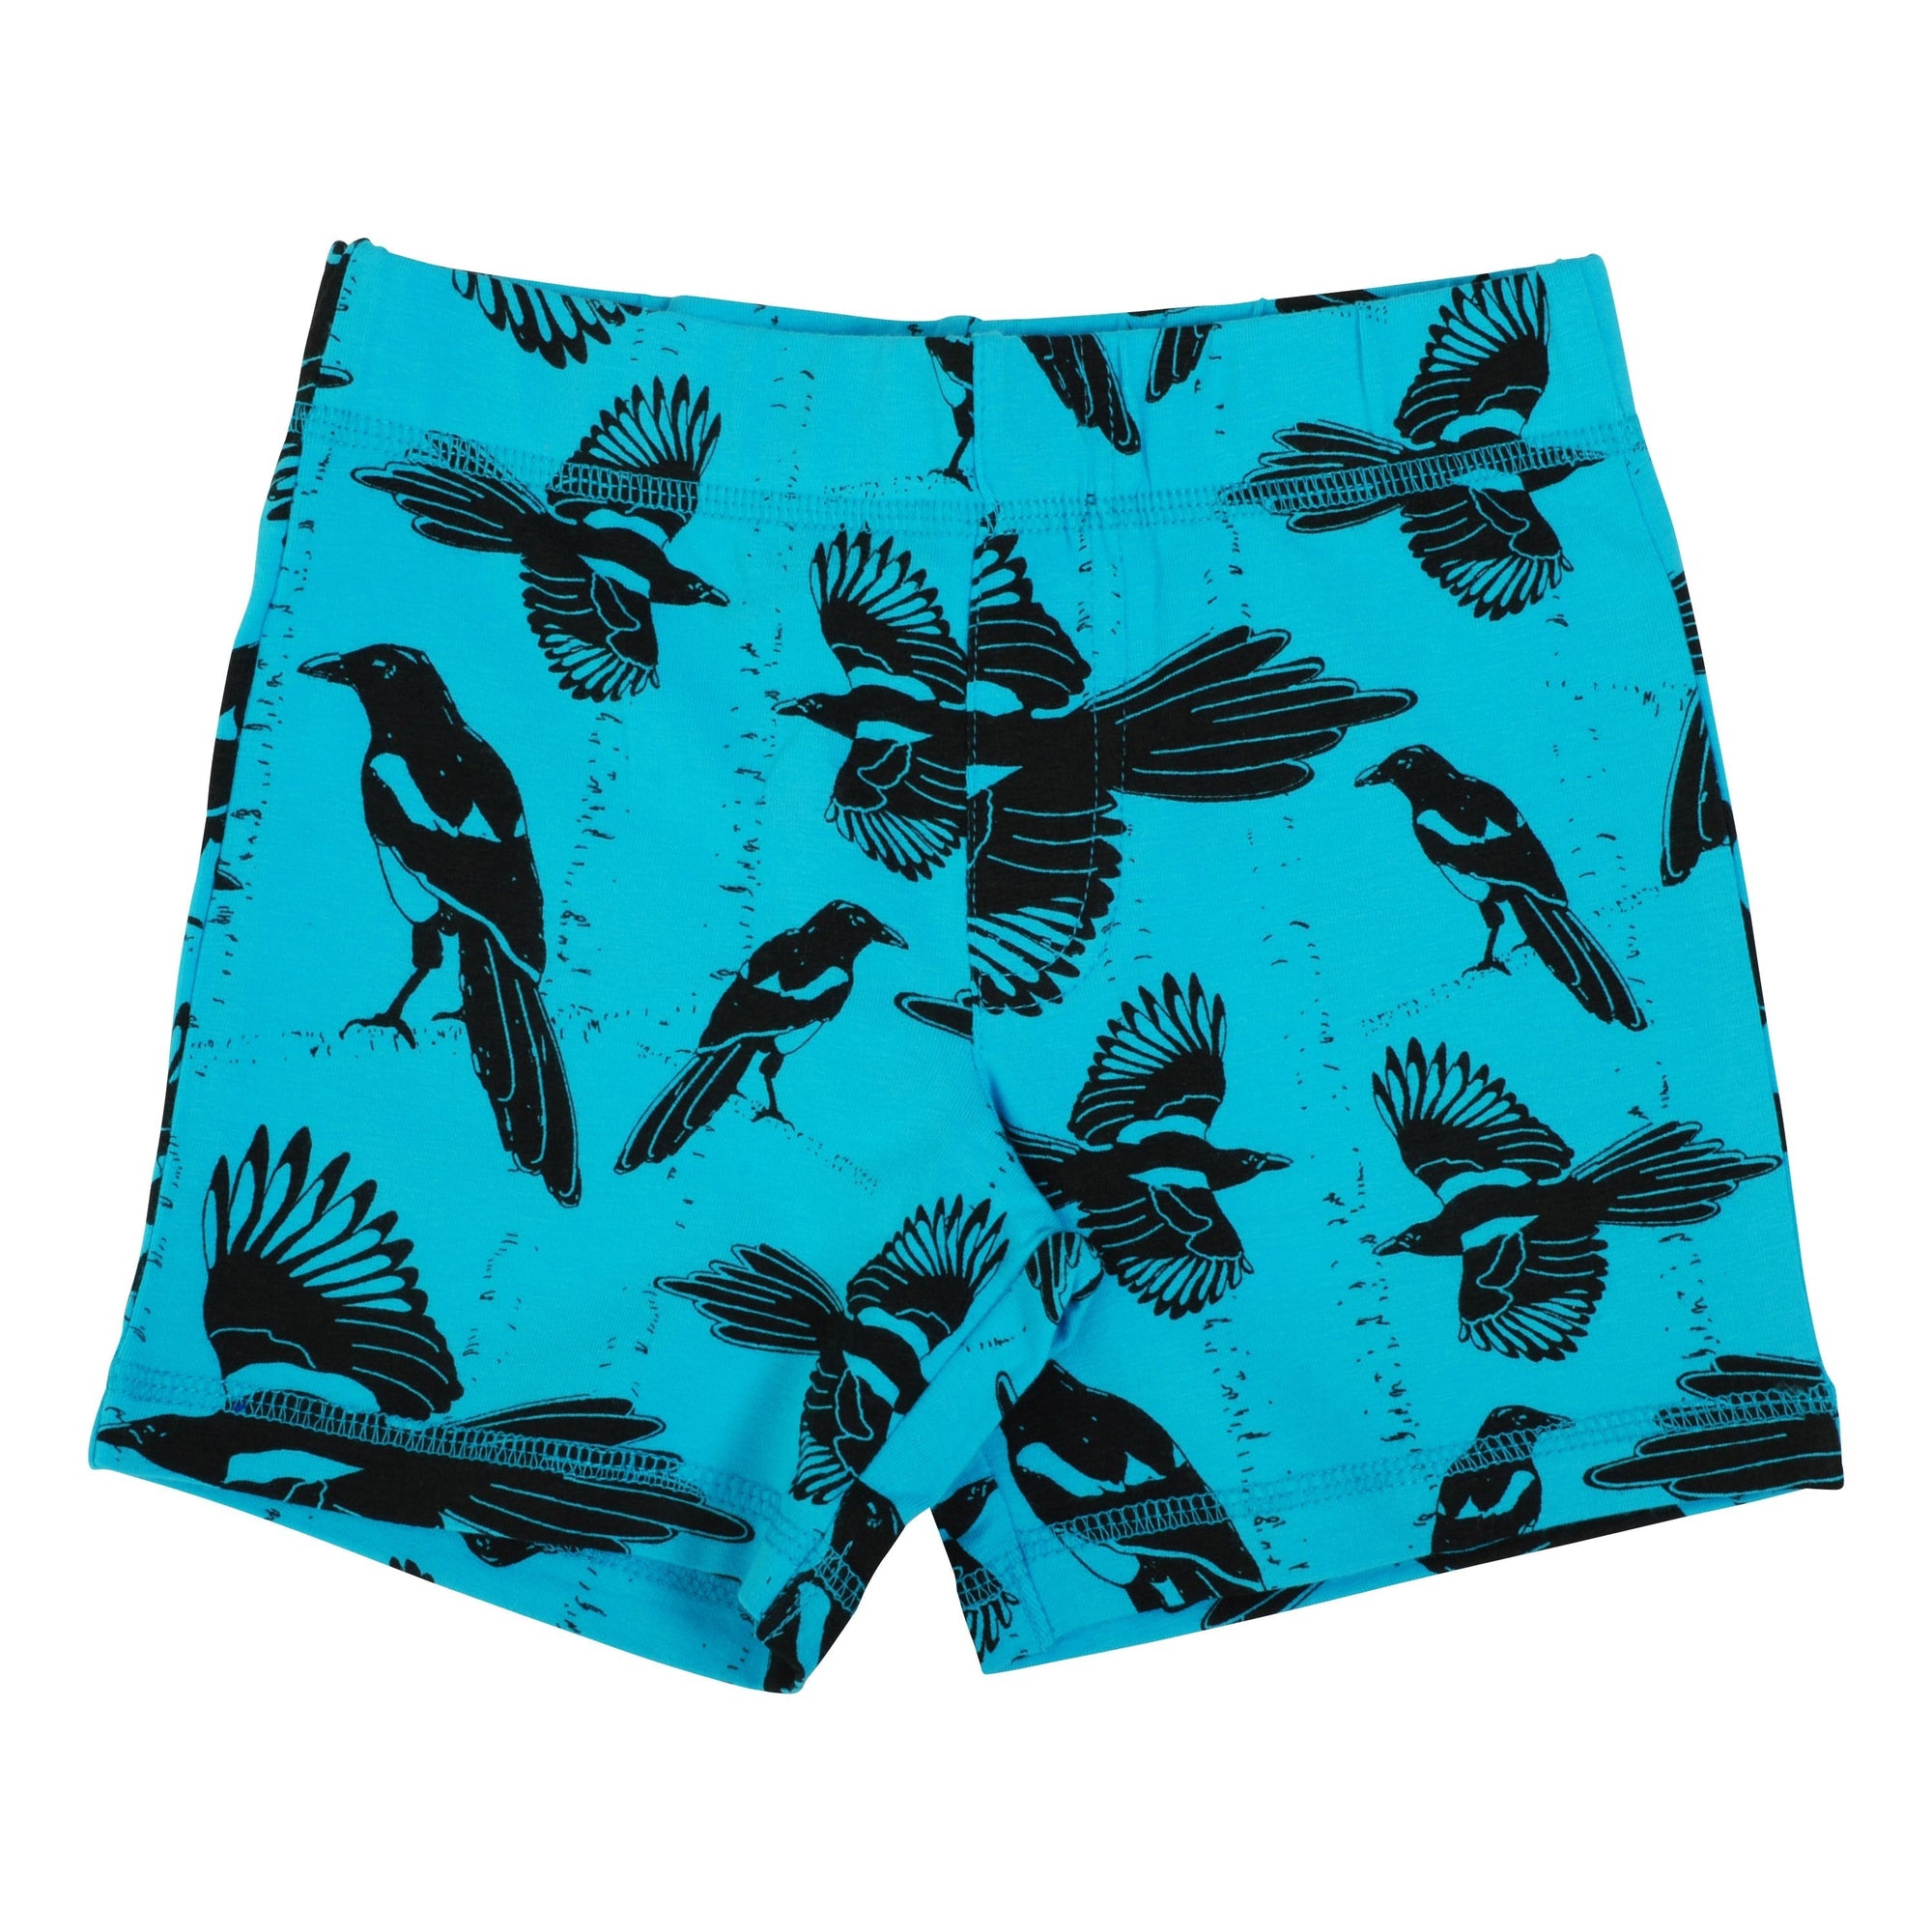 Pica Blue Atoll Shorts - 2 Left Size 6-12 months & 10-12 years-More Than A Fling-Modern Rascals